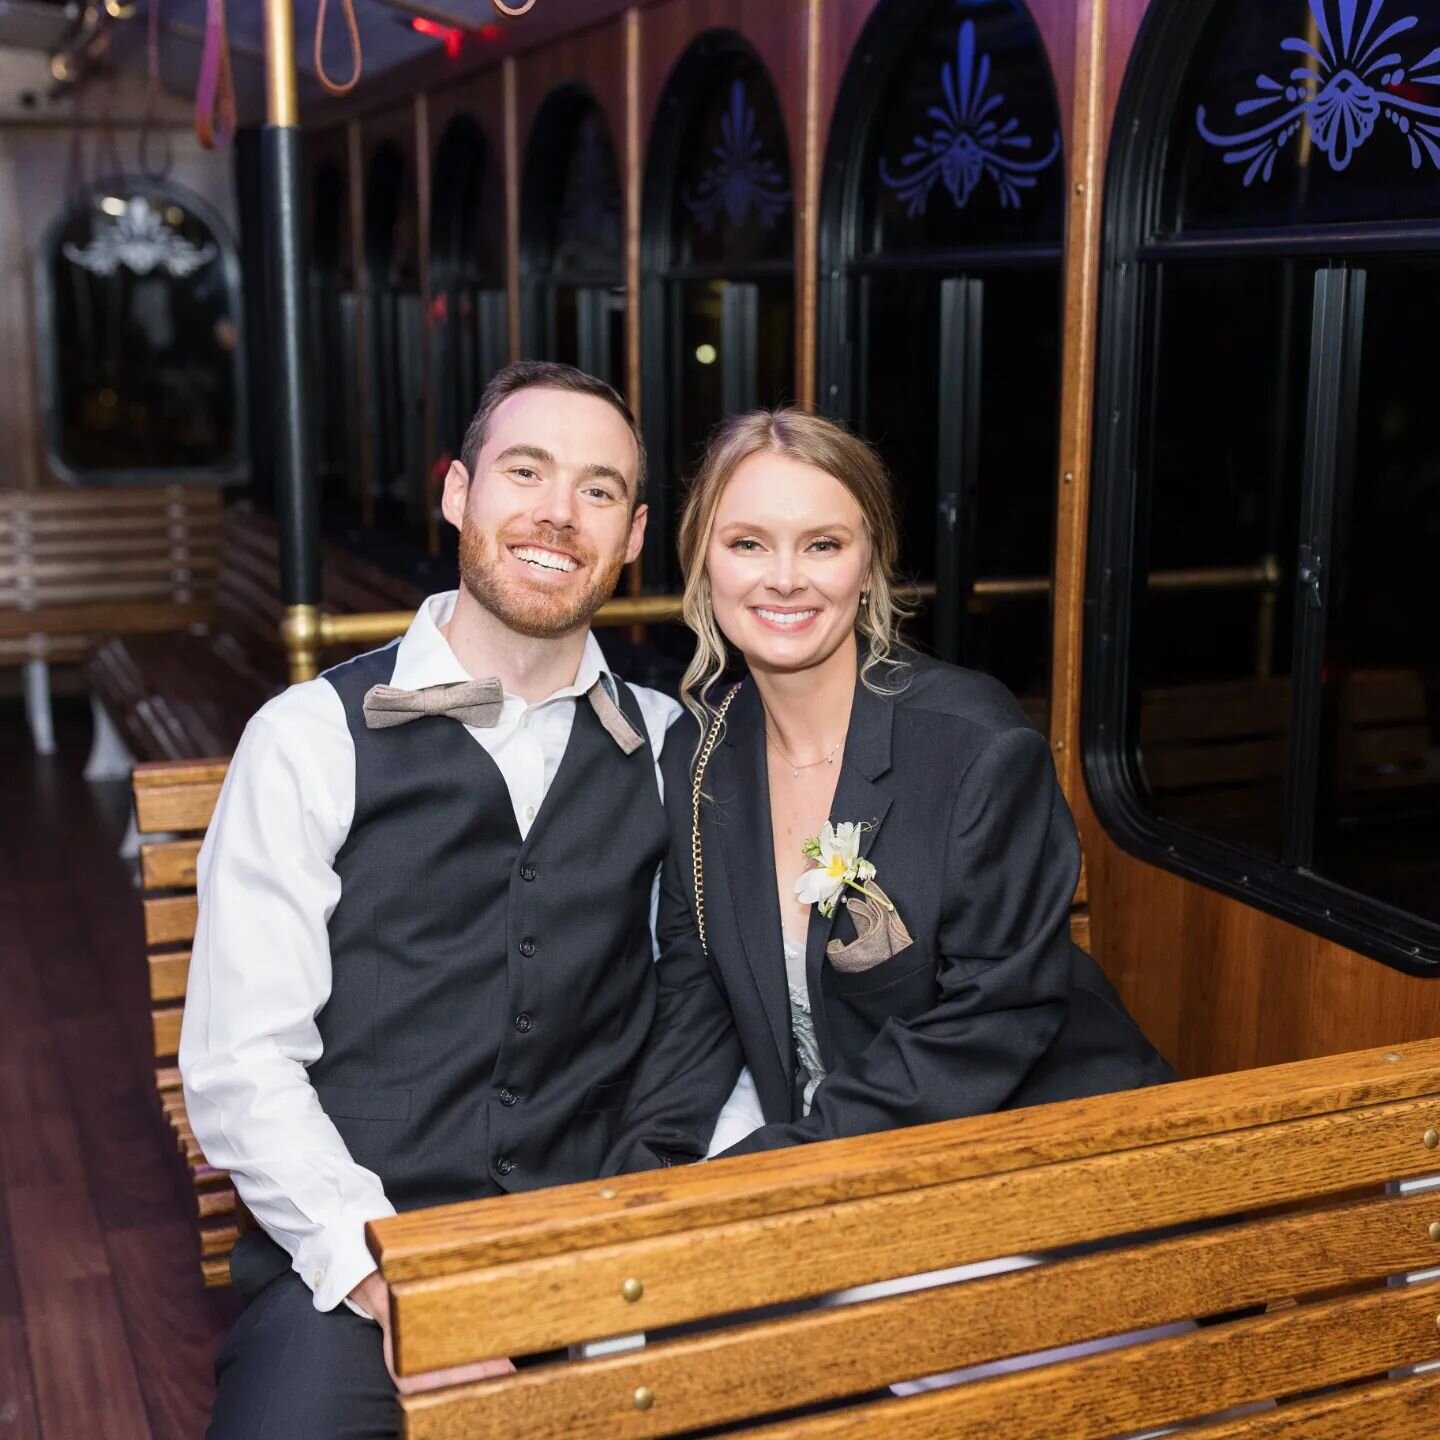 It's Wedding Wednesday and we are so happy to feature Nick and Alison on The Great Raleigh Trolley on their wedding day. 
Thanks for riding! 

Venue @merrimonwynne

Photographer @sarahhinckleyphoto&nbsp;

Planner @thegathering.co

Caterer @beaucateri